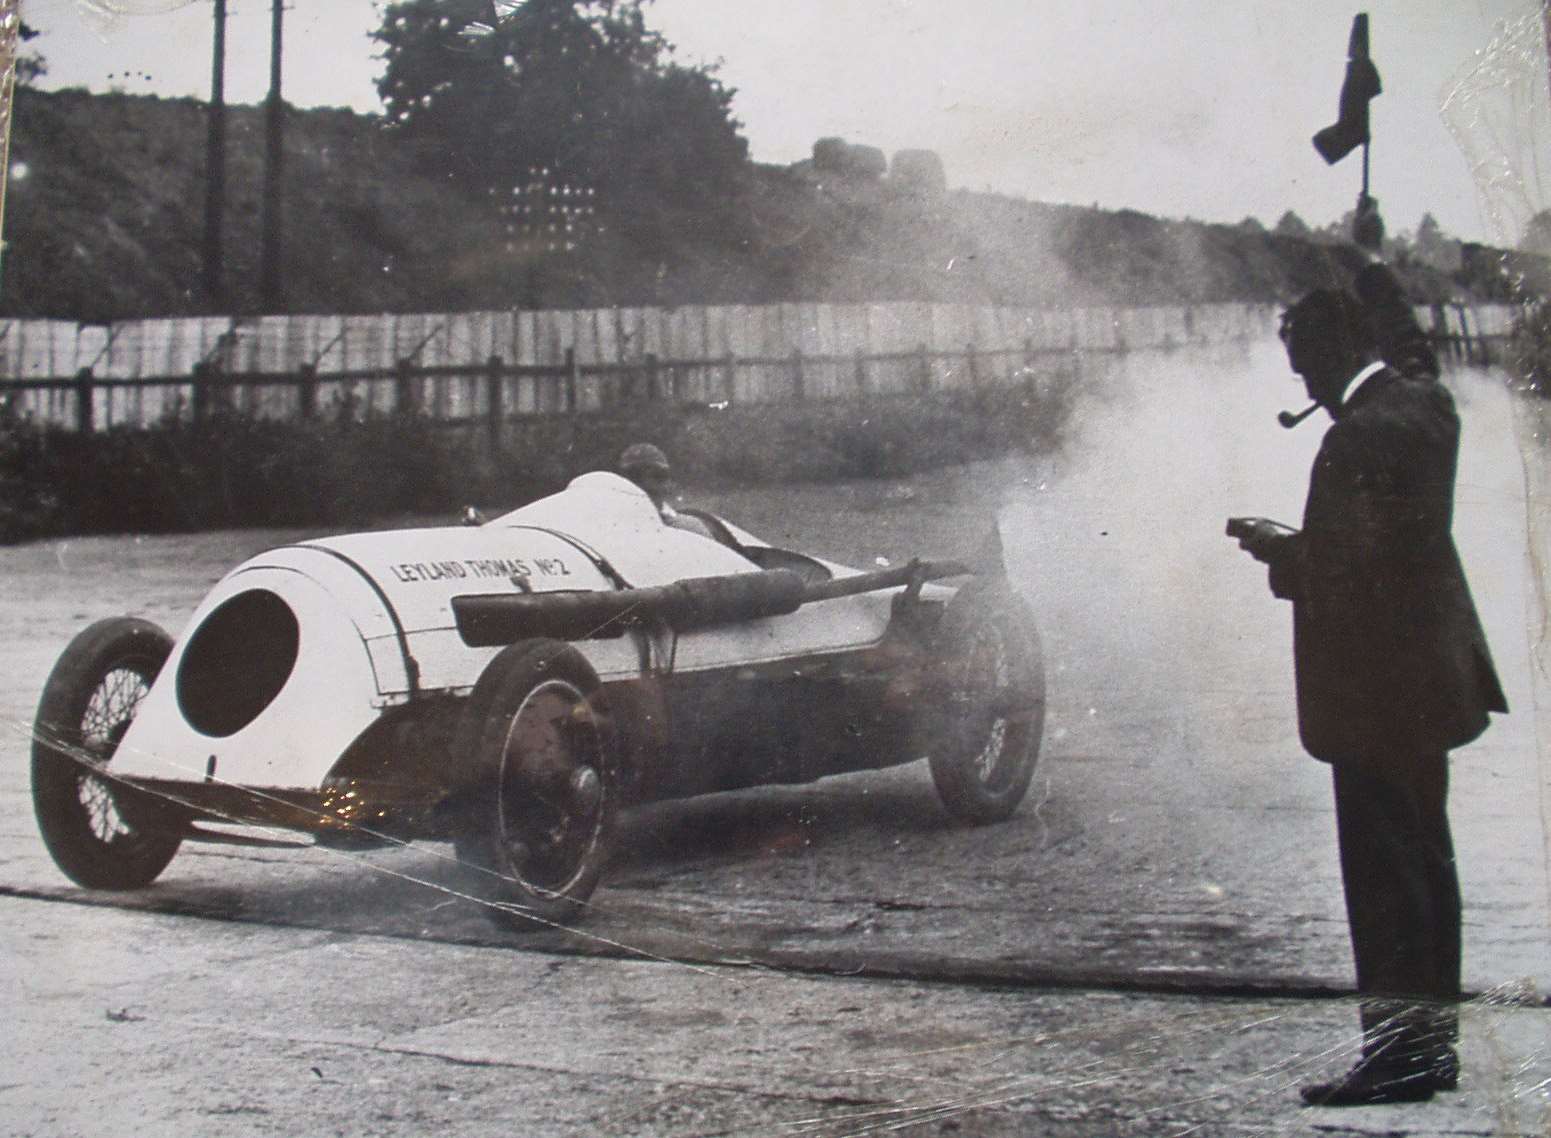 Historic images show the Leyland-Thomas in action in the 1920s